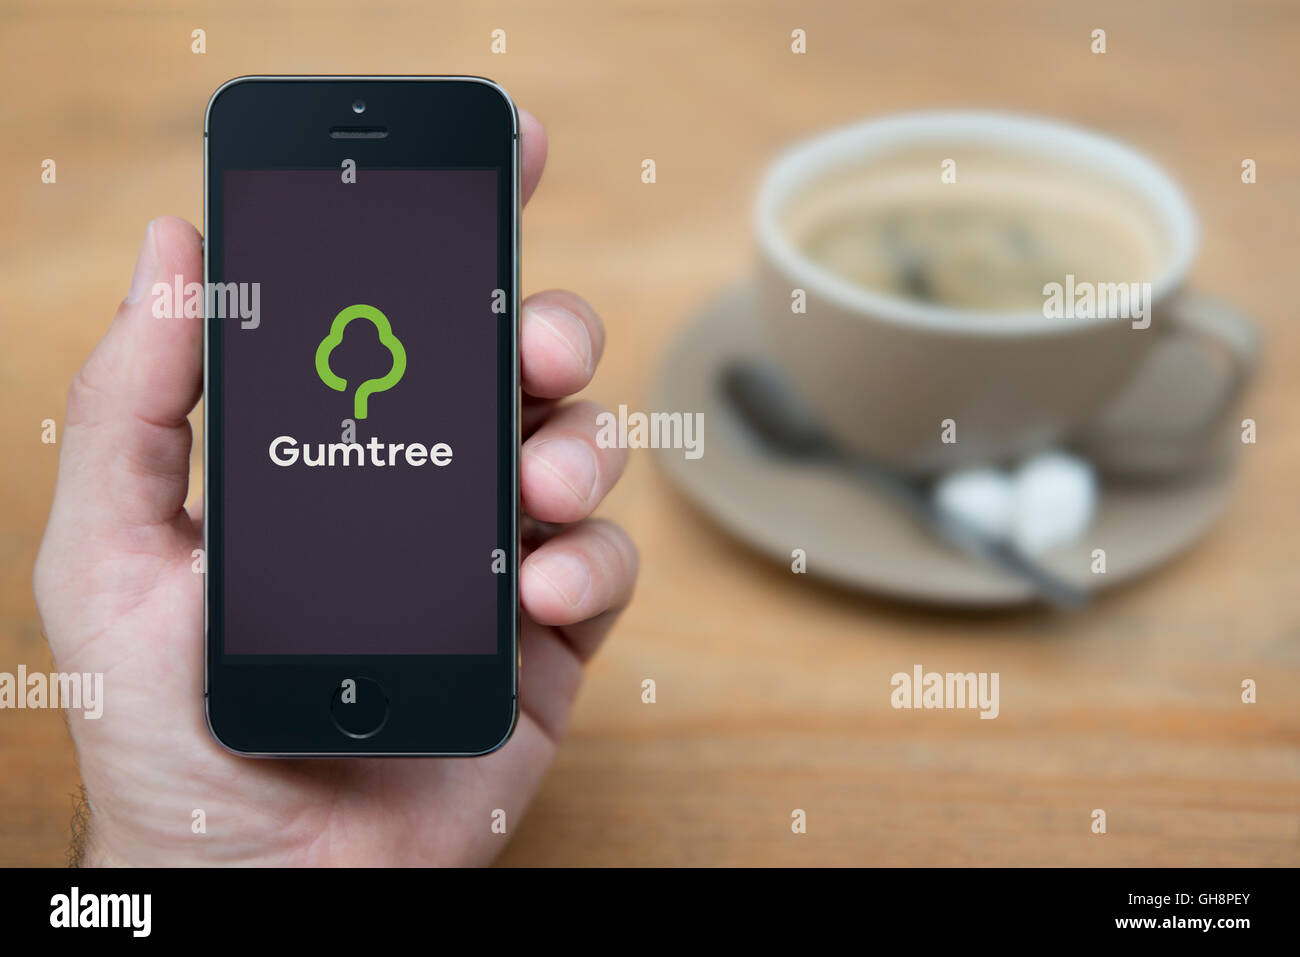 A man looks at his iPhone which displays the Gumtree logo, while sat with a cup of coffee (Editorial use only). Stock Photo